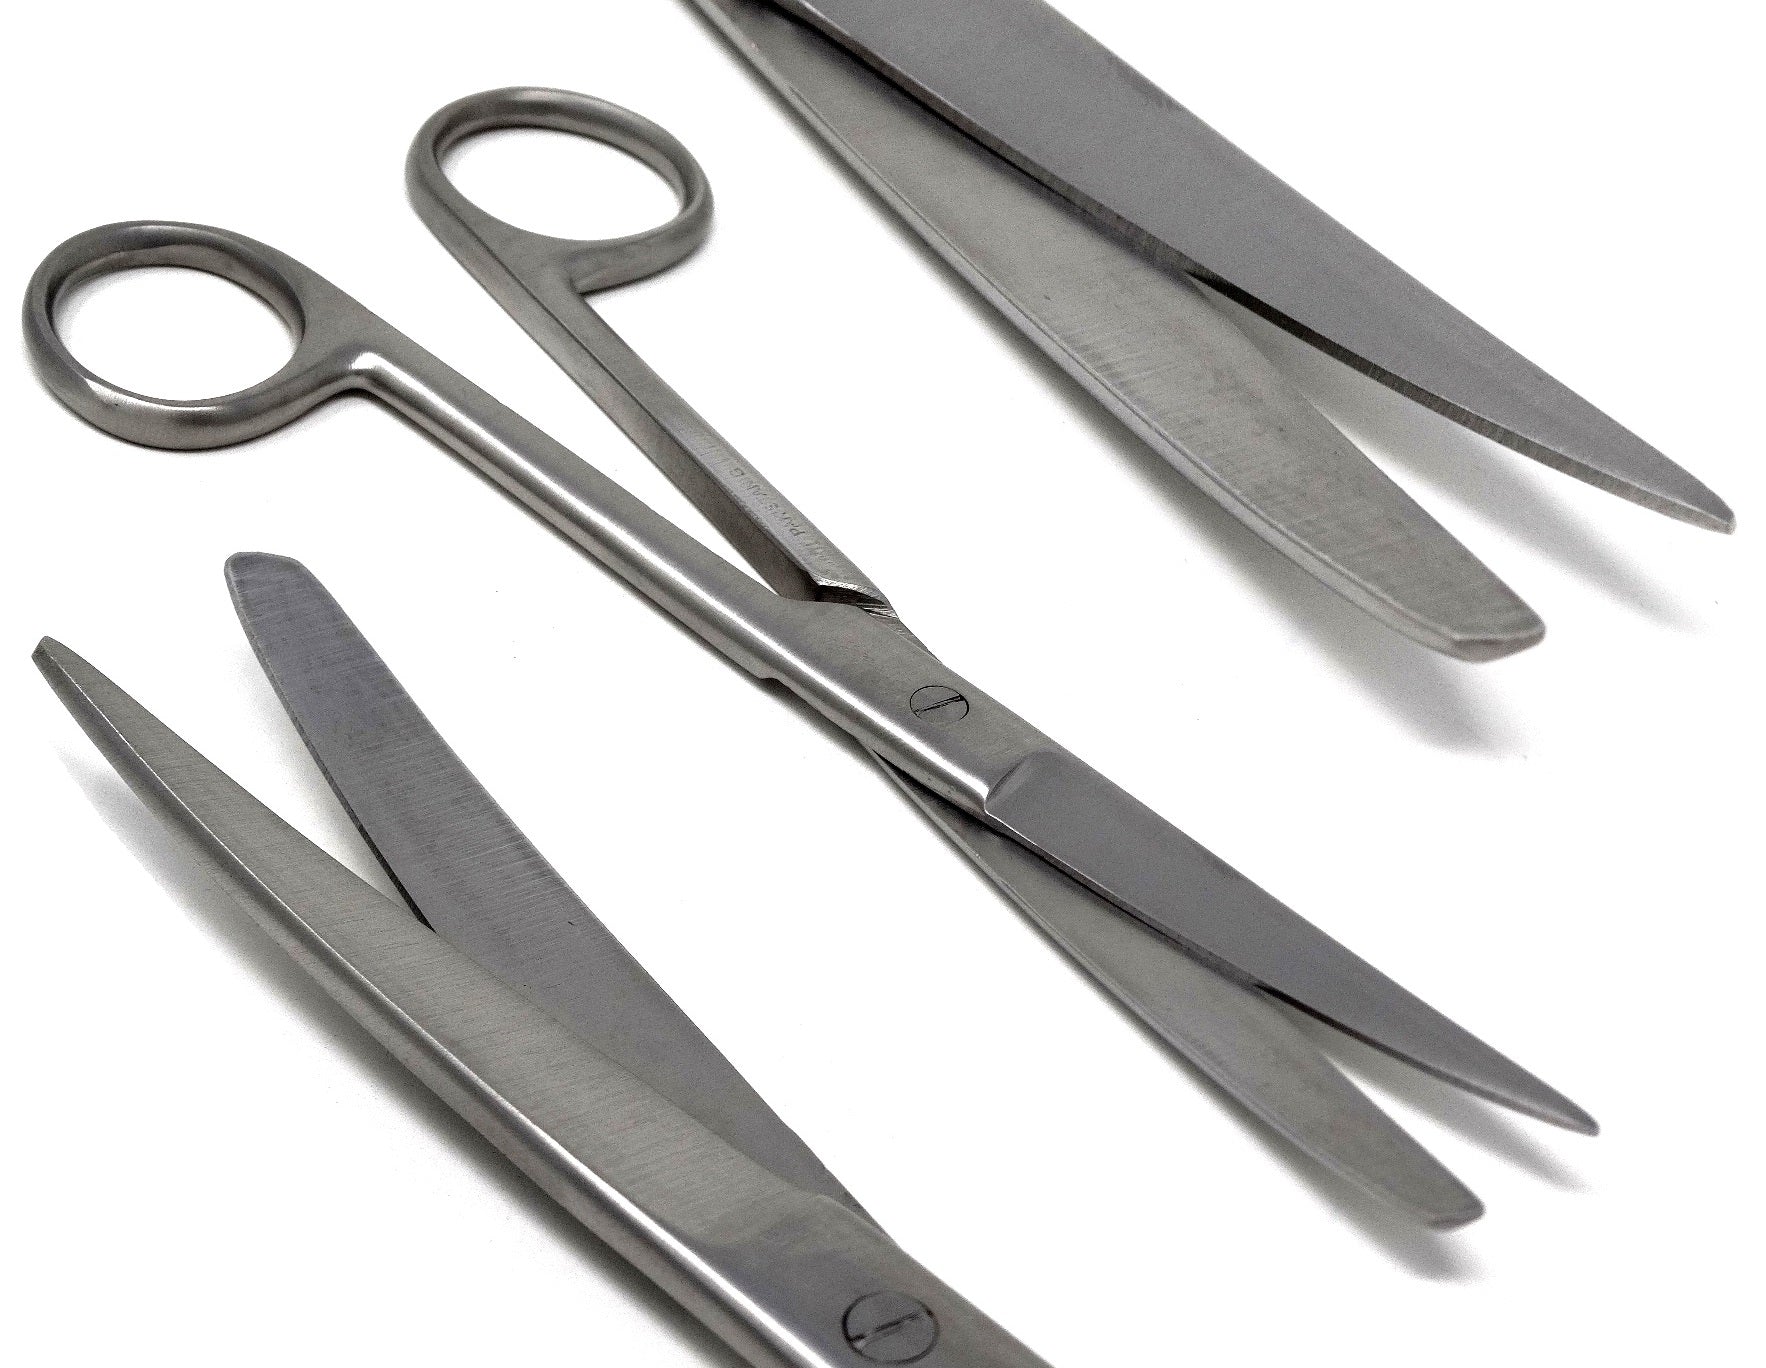 DR Instruments Operating Scissors with Sharp/Sharp Points, Stainless Steel